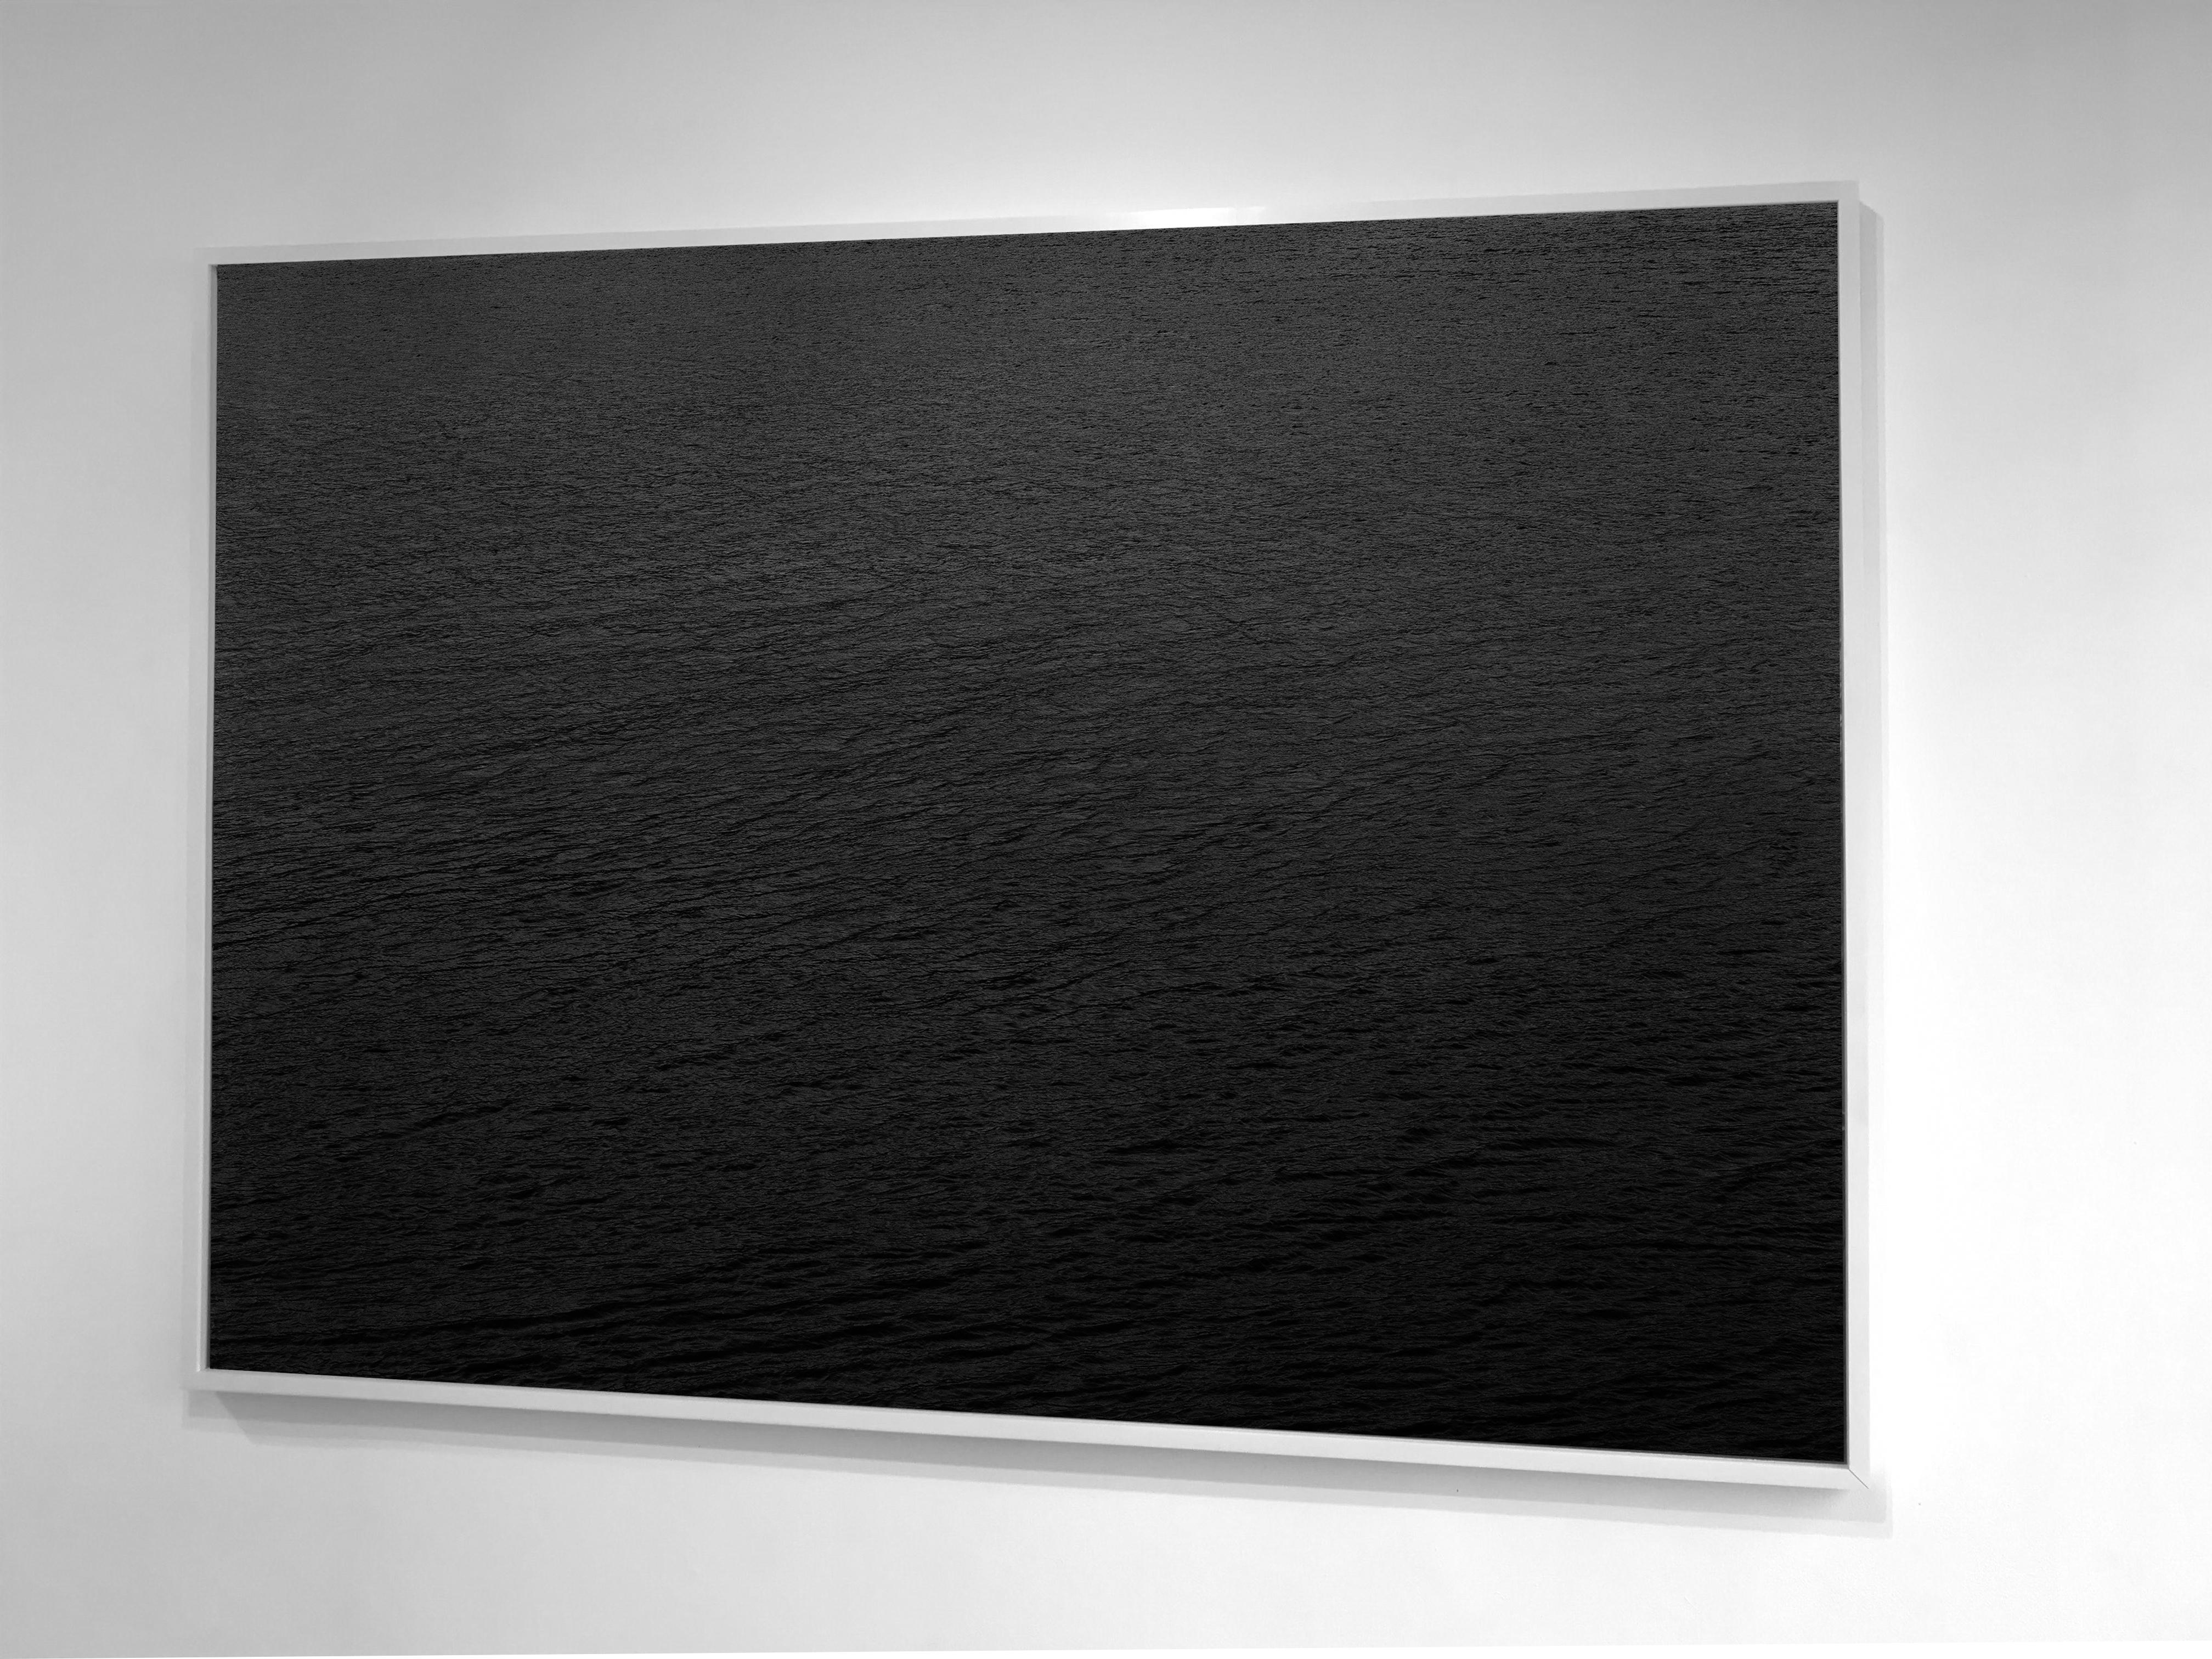 "Water, 45" Minimalist Landscape, large format photograph, framed and mounted